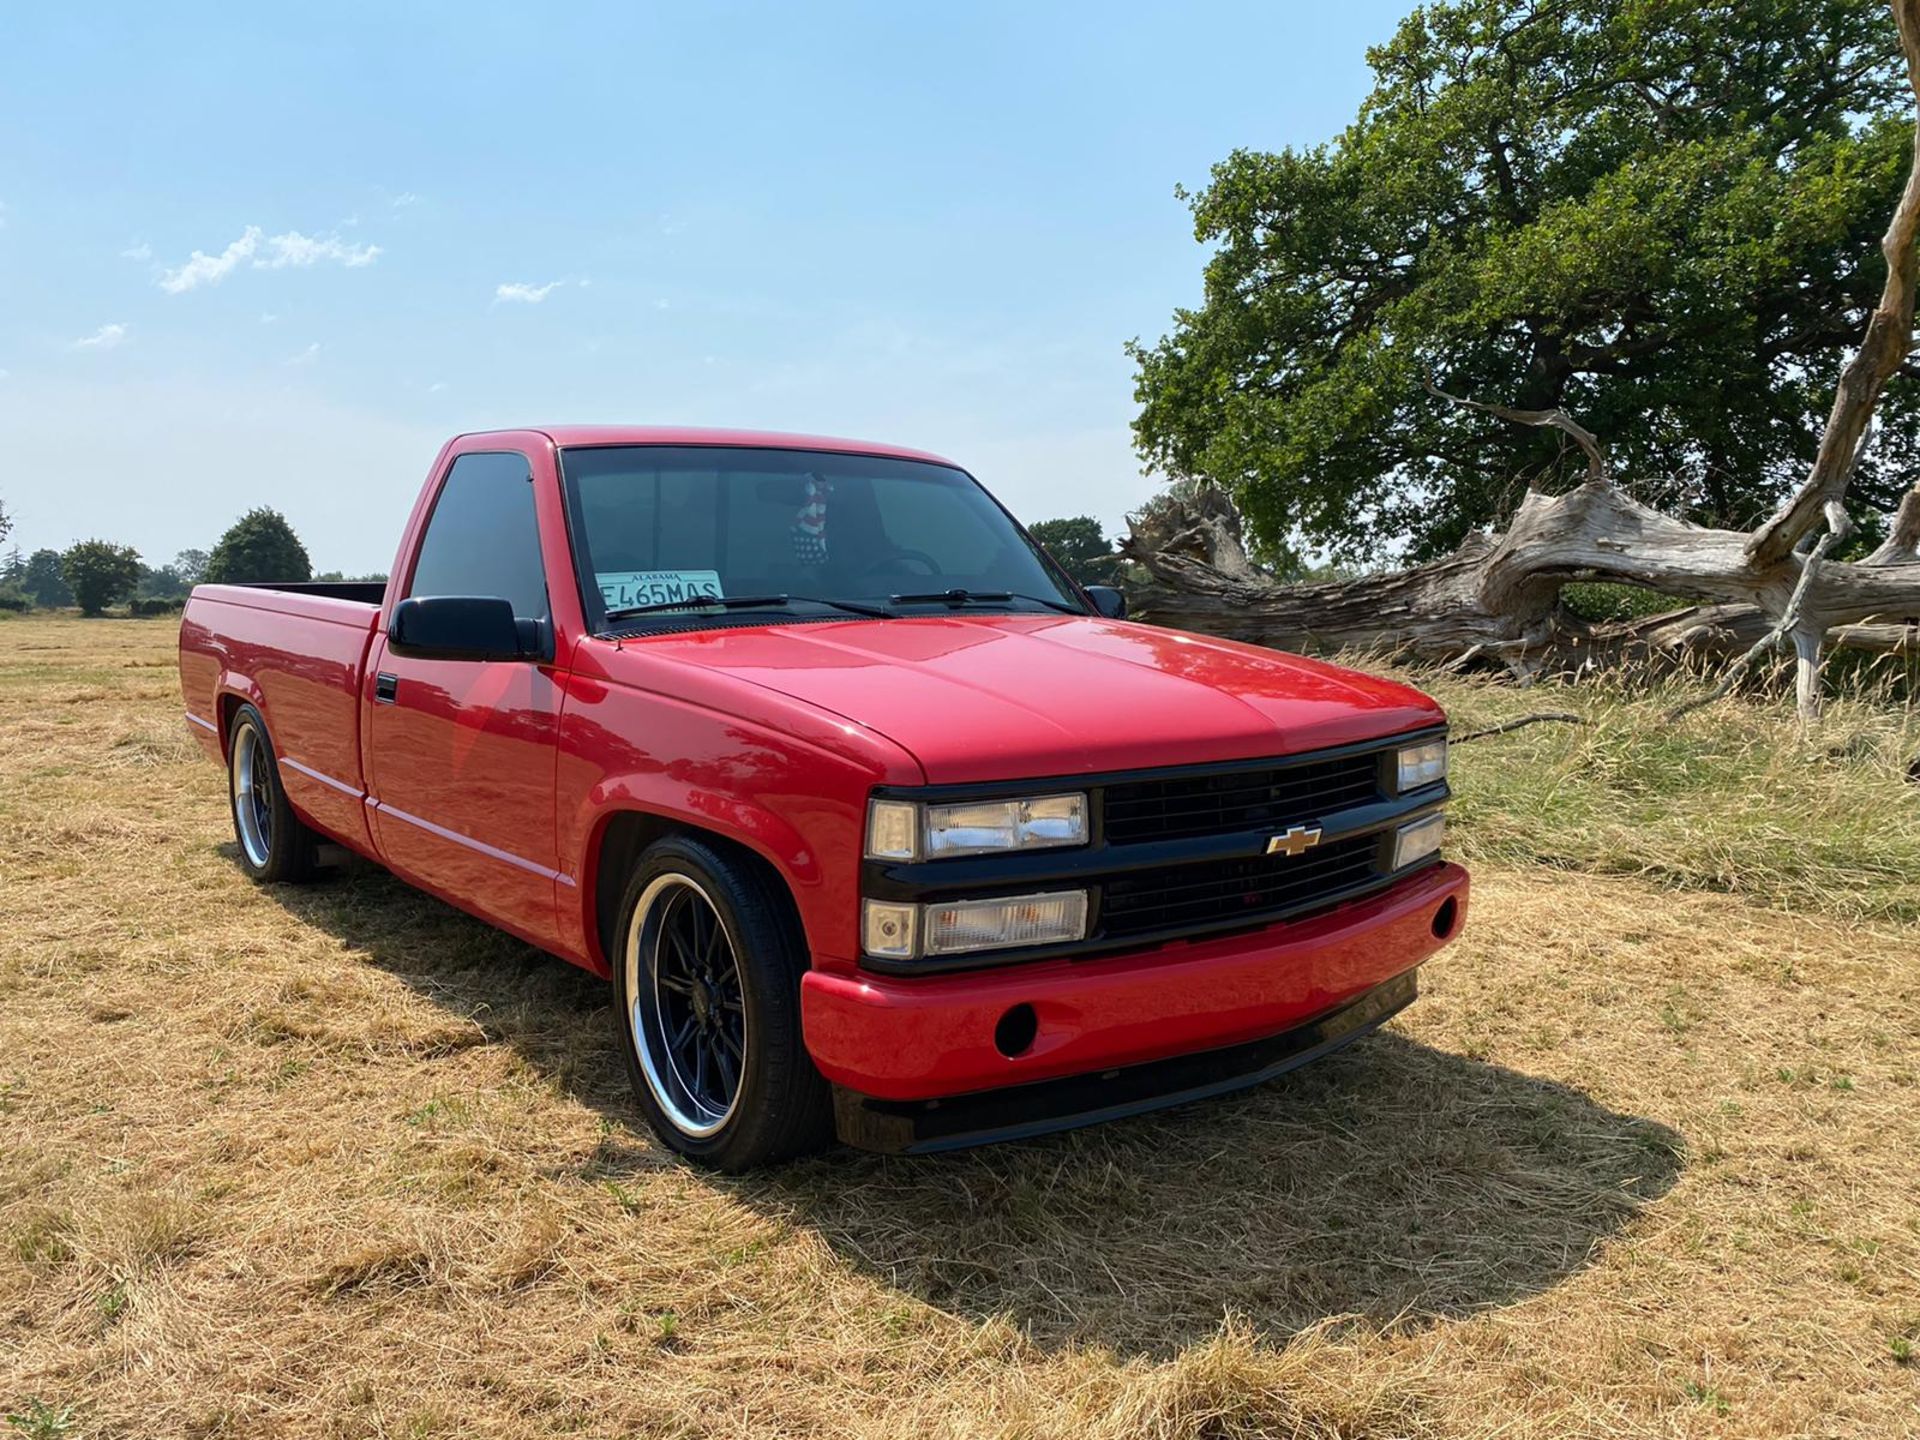 Super Red 1988 Chevrolet C1500 / OBS / GMT-400 - Single cab long bed (8ft) - Image 8 of 15